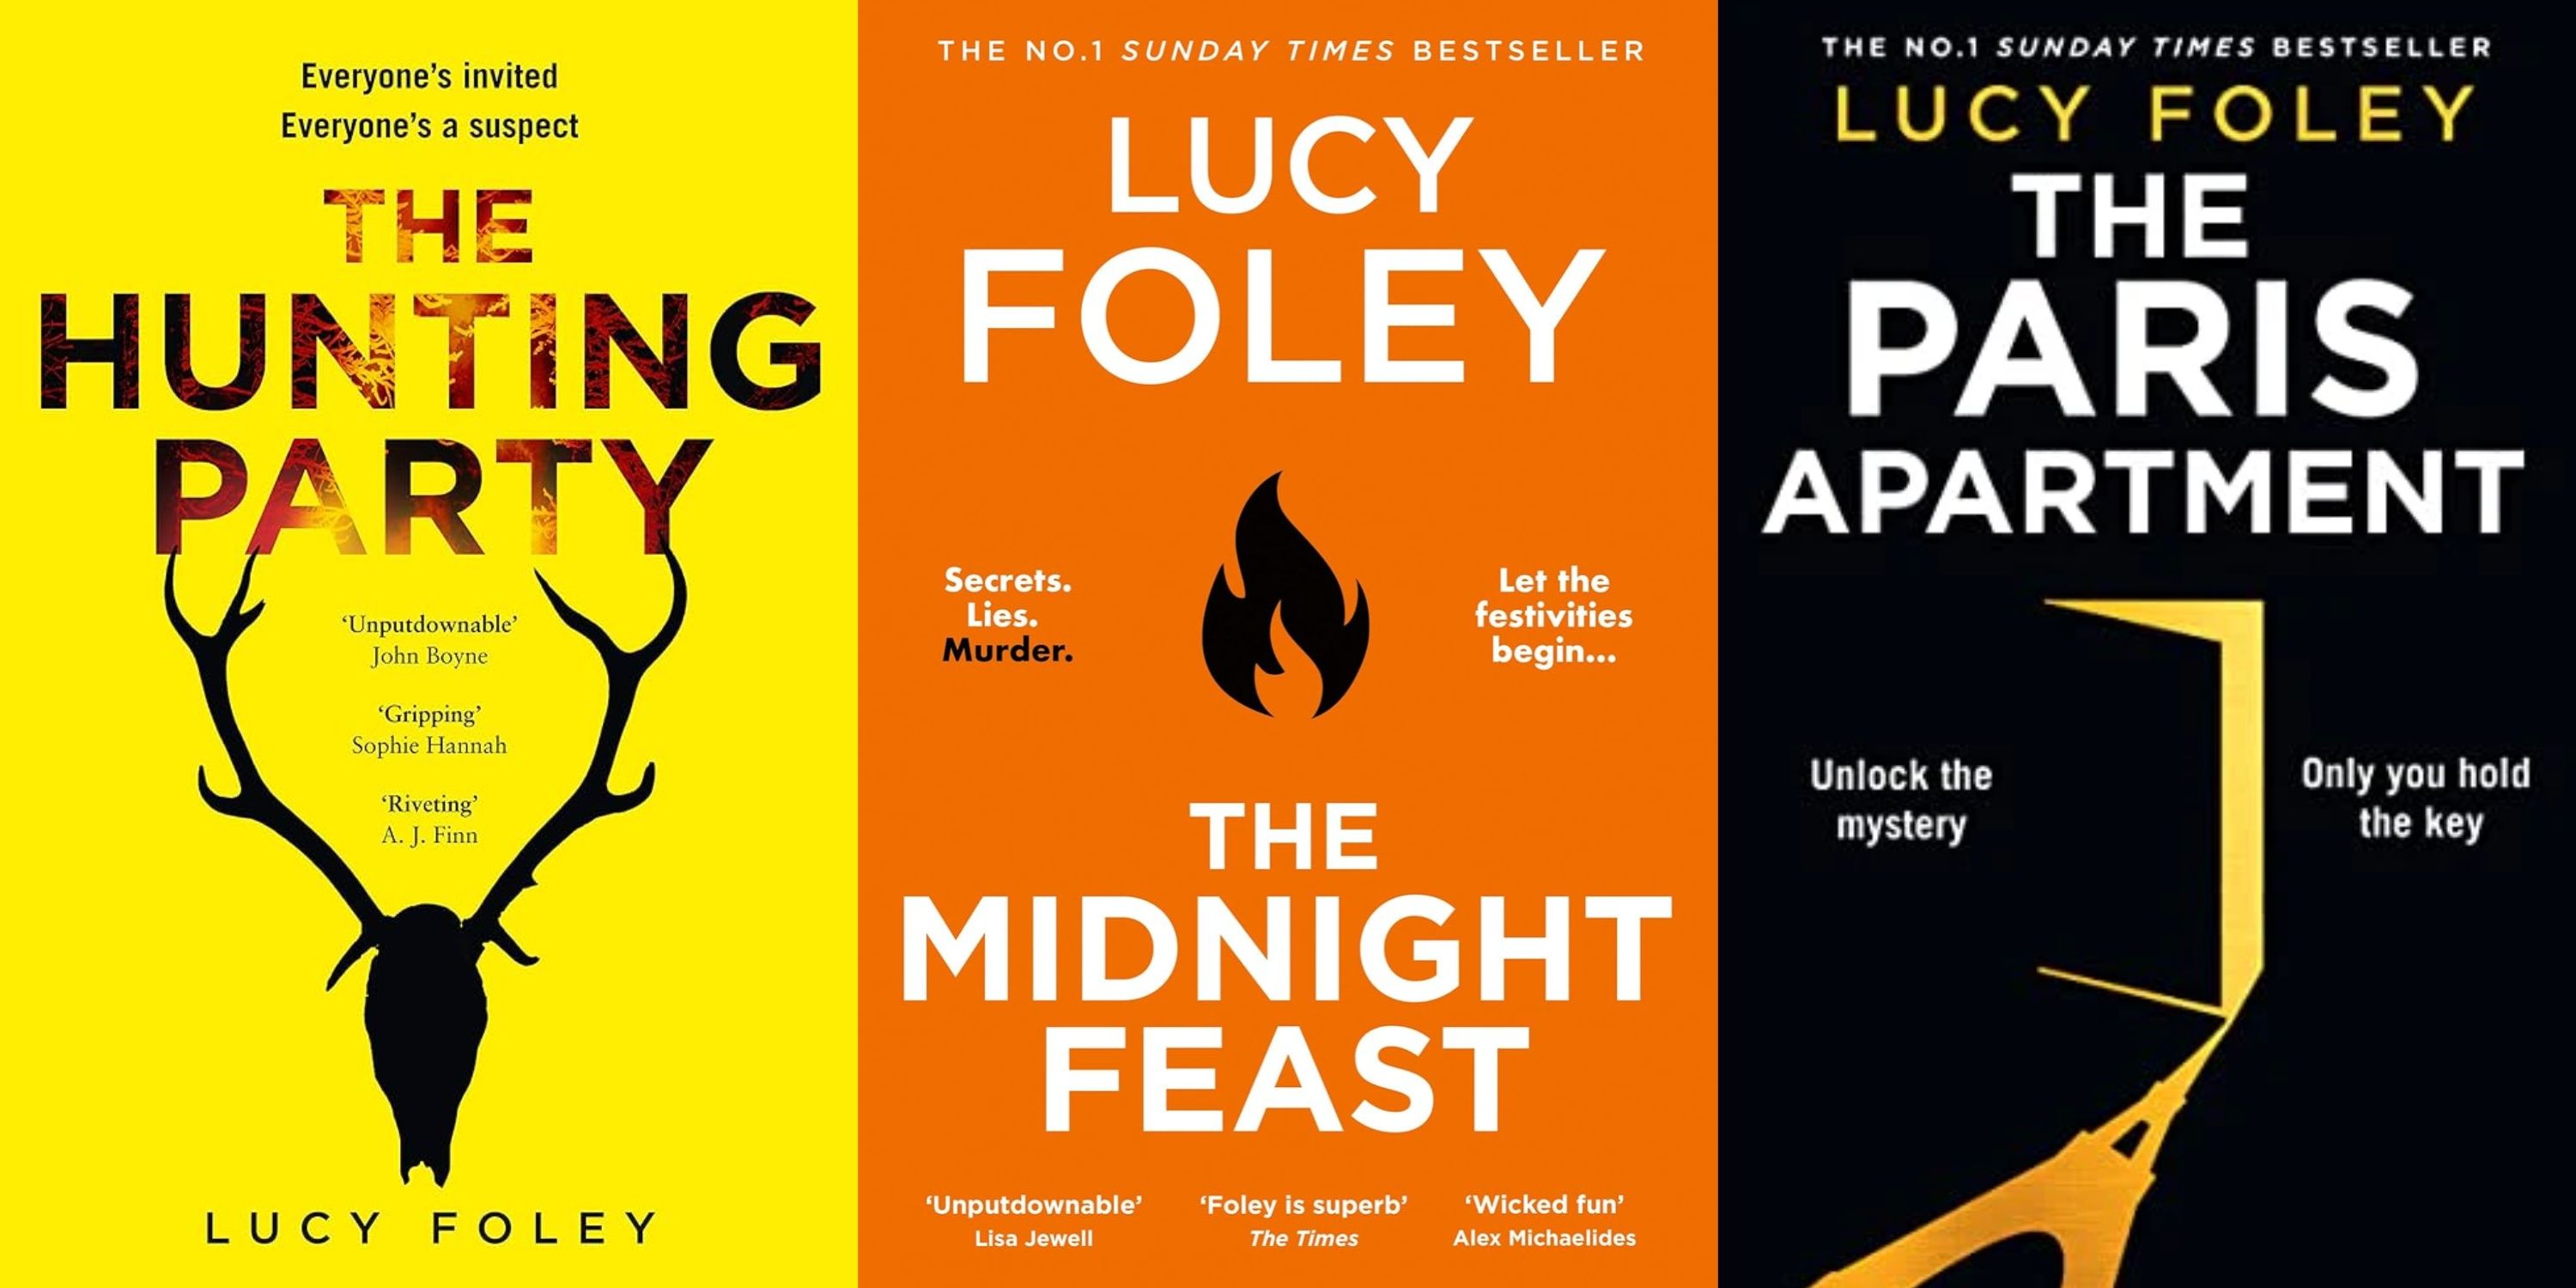 The UK book covers for The Hunting Party, The Midnight Feast, and The Paris Apartment by Lucy Foley